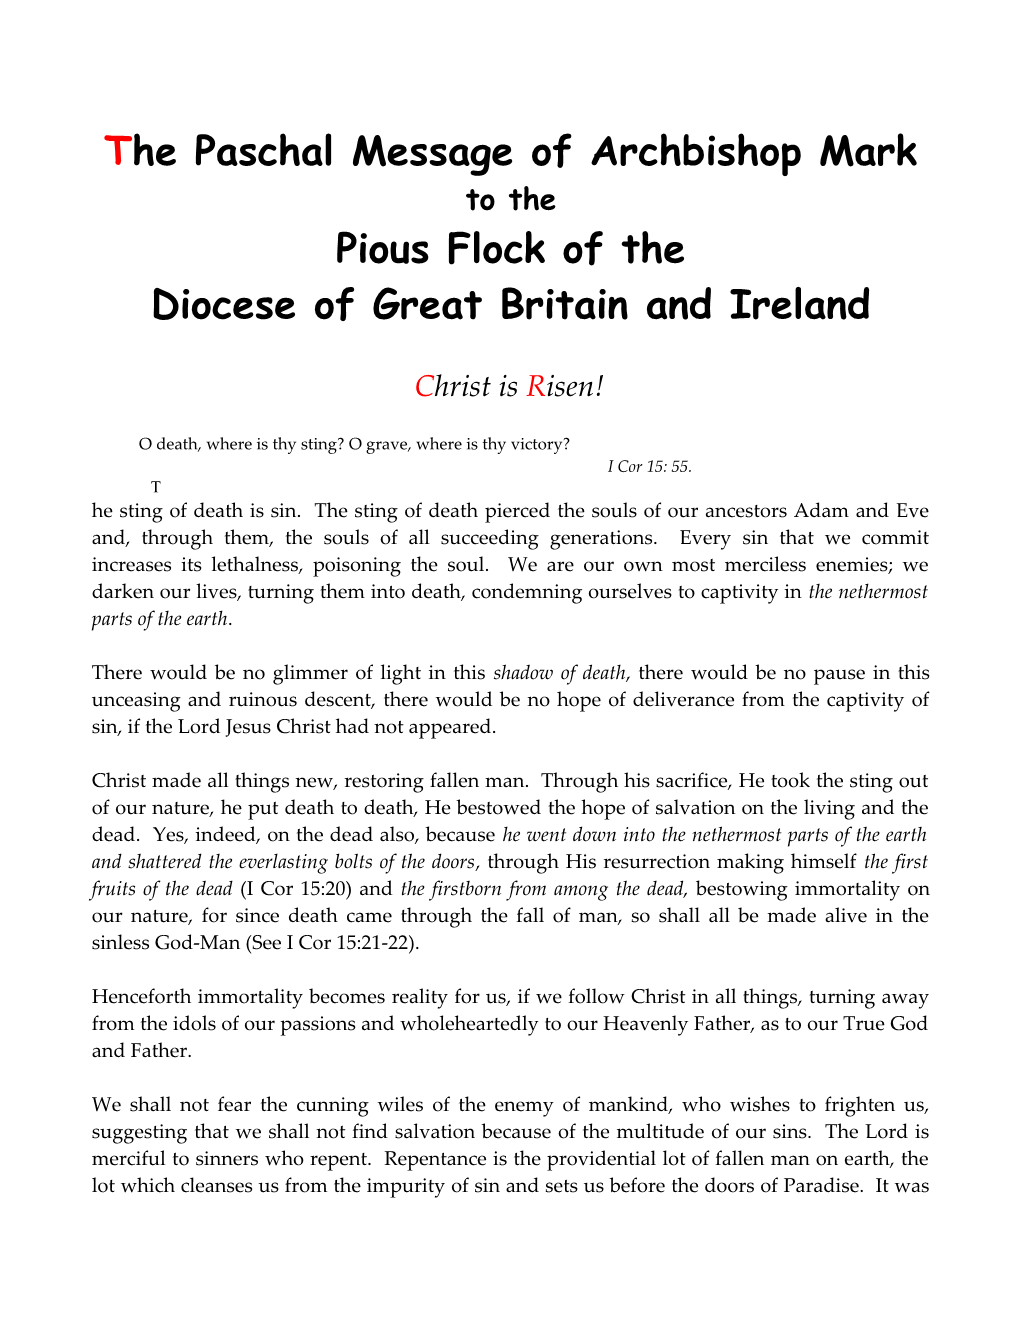 The Paschal Message of Archbishop Mark